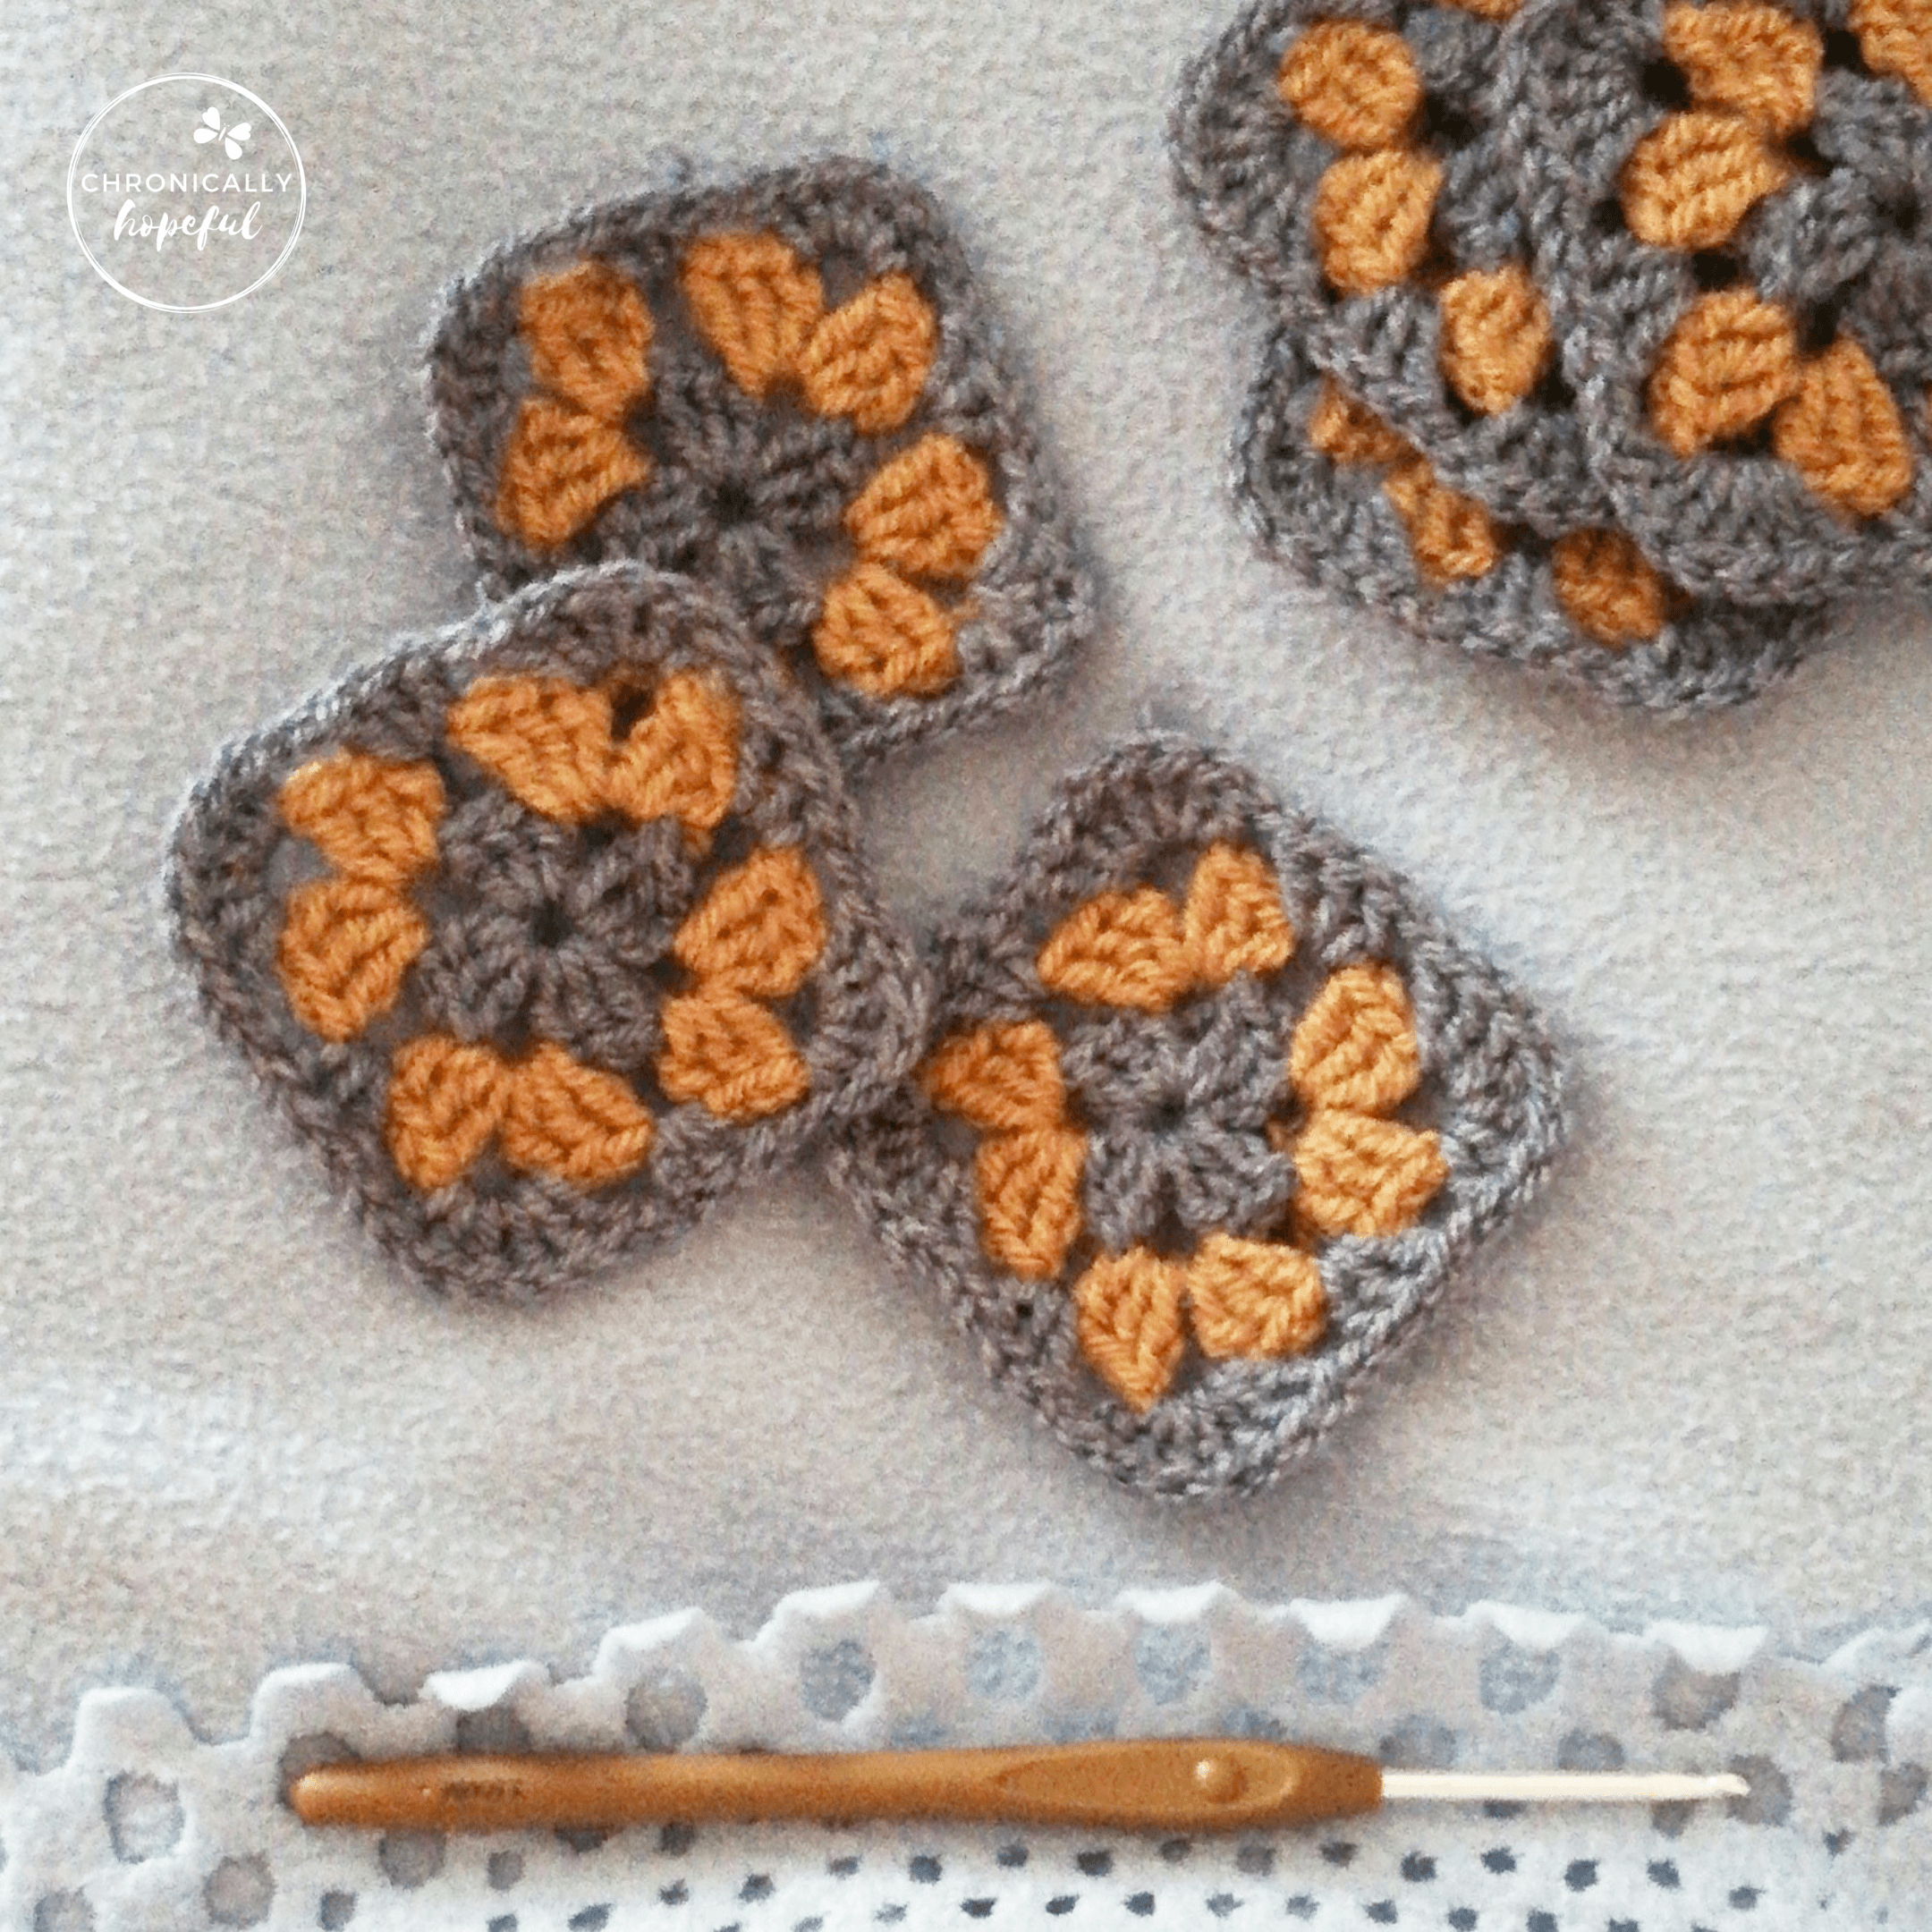 Crocheted granny squares in blue and brown, lying on a blanket. Brown crochet hook to the bottom of the picture.